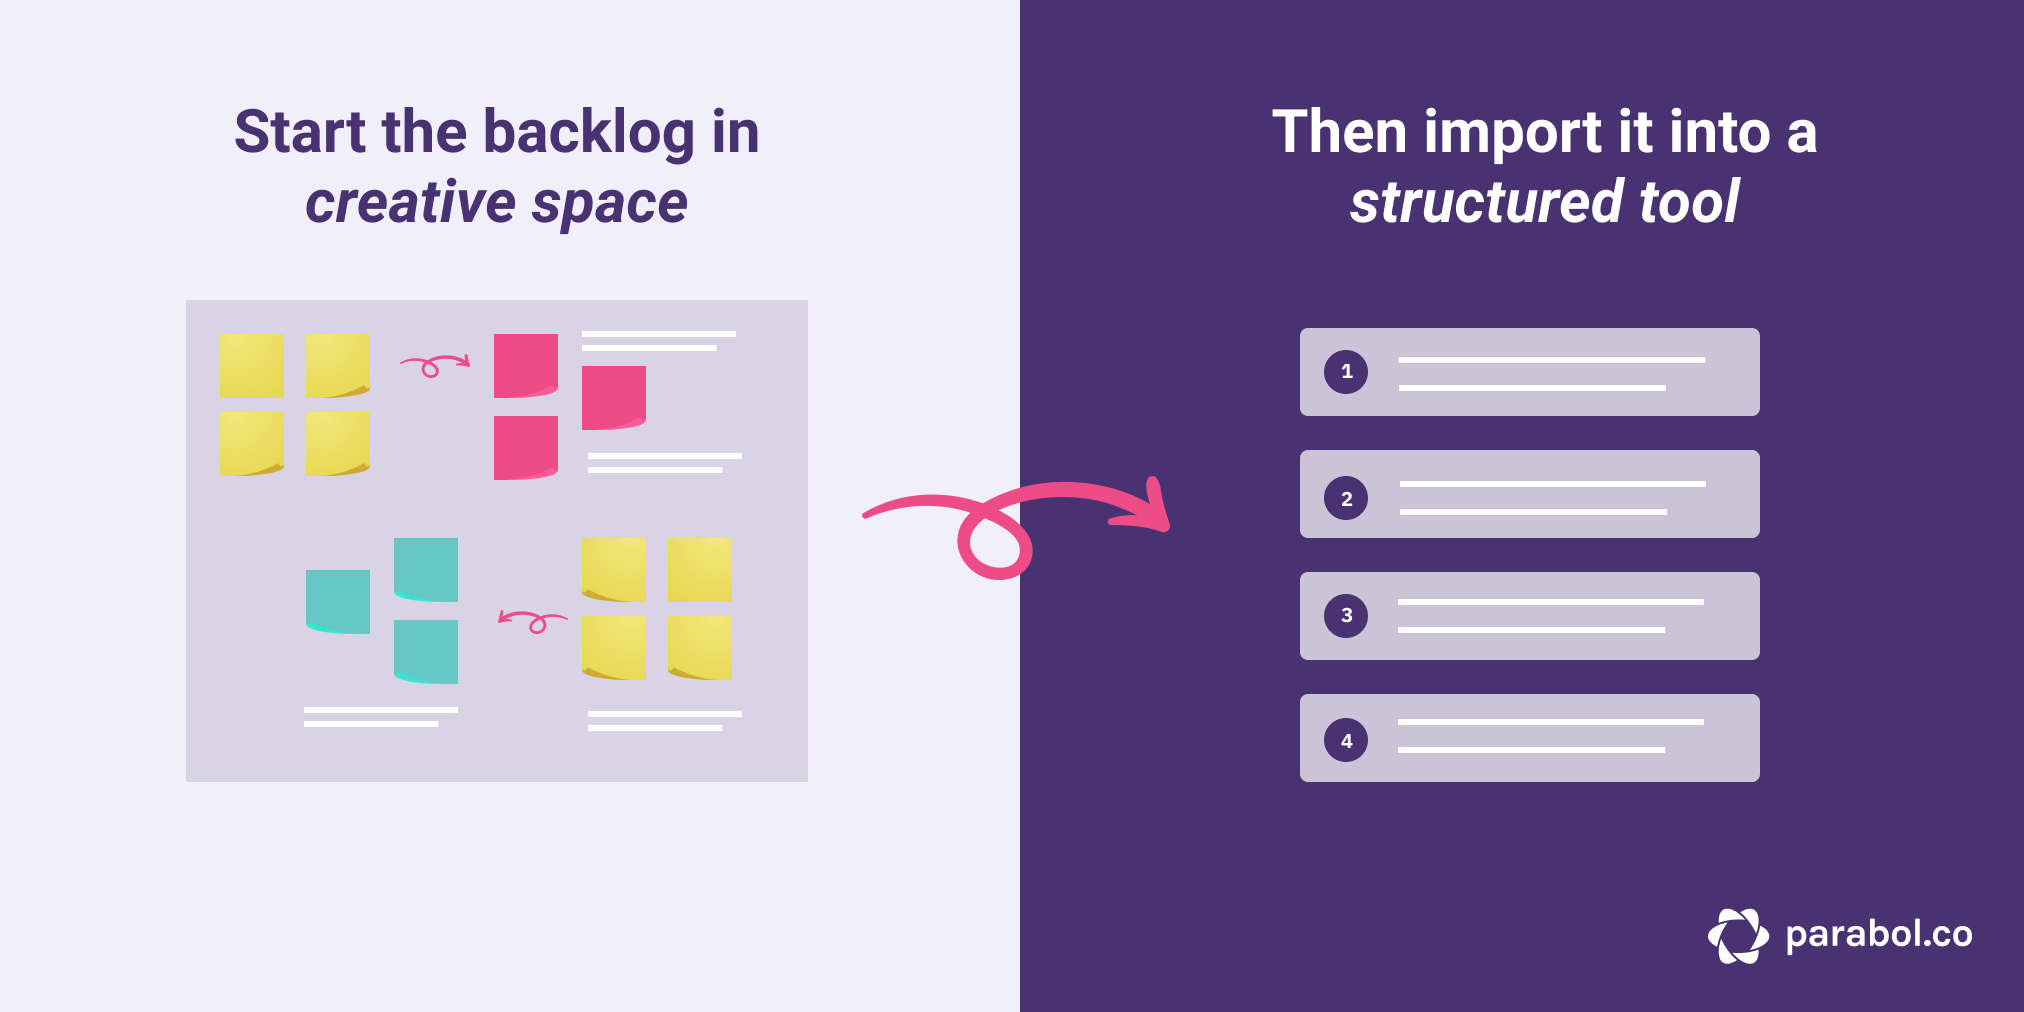 Moving the product backlog from creative to structured space